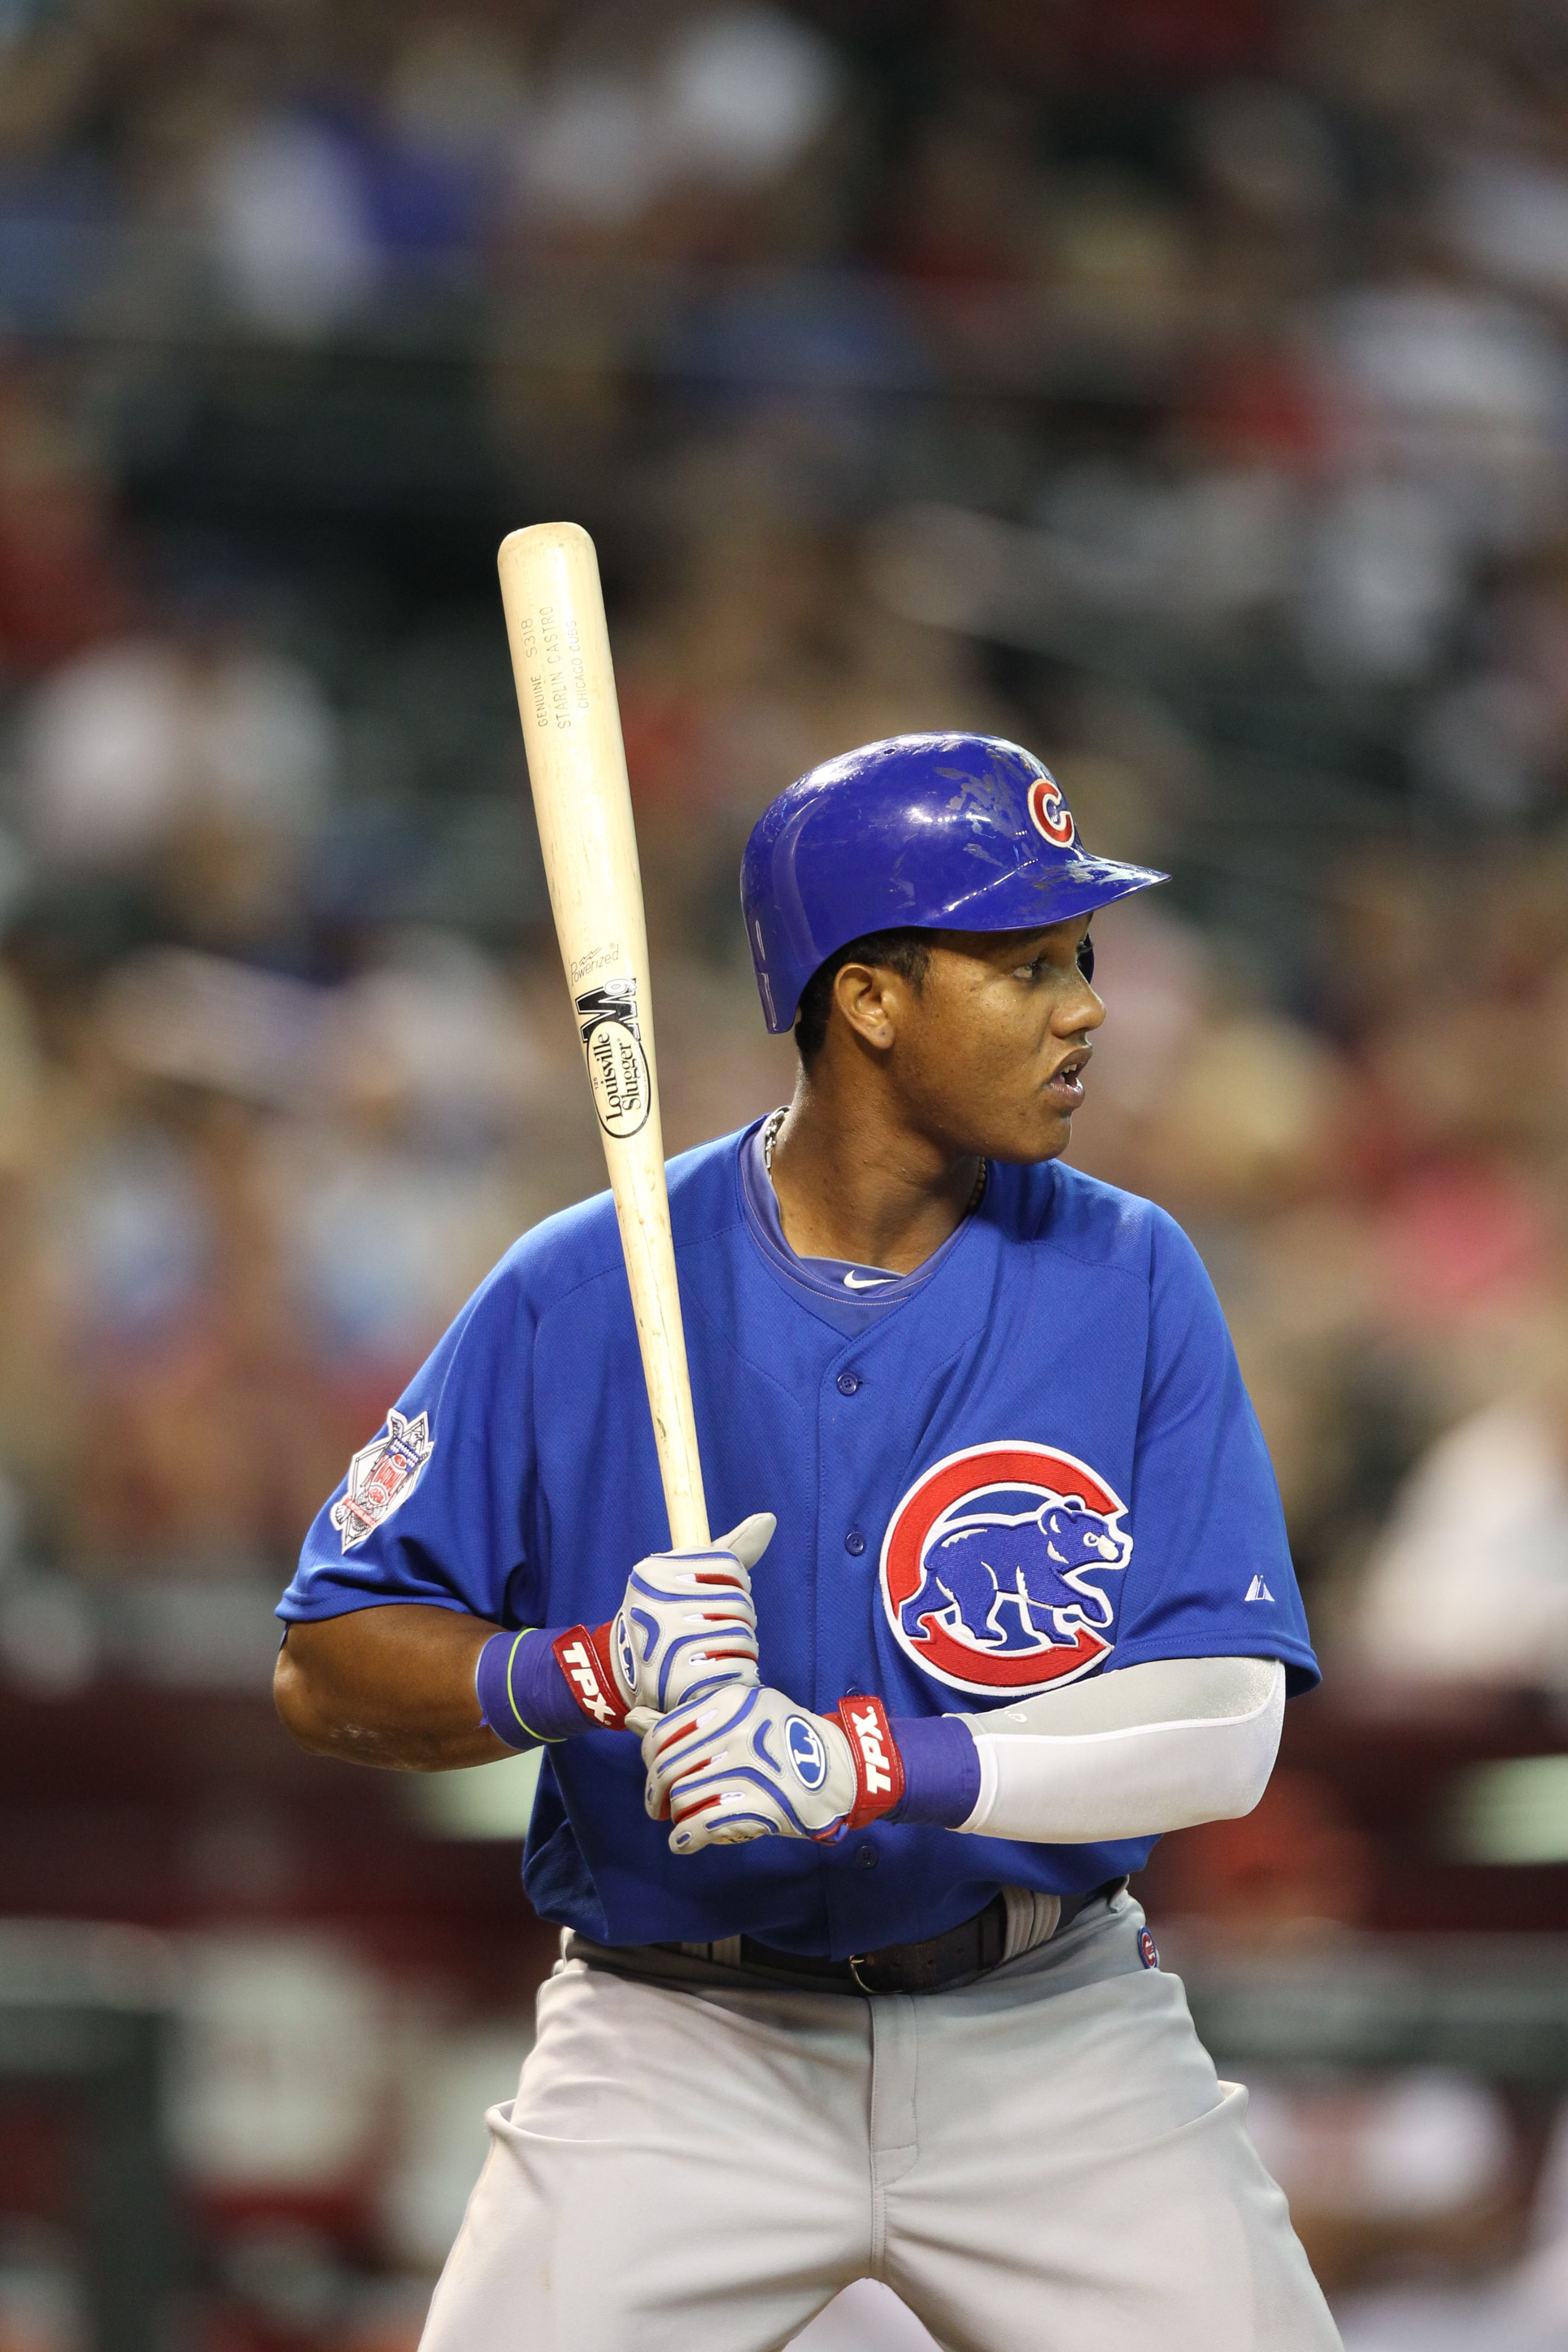 PHOENIX - JULY 05:  Starlin Castro #13 of the Chicago Cubs bats against the Arizona Diamondbacks during the Major League Baseball game at Chase Field on July 5, 2010 in Phoenix, Arizona.  (Photo by Christian Petersen/Getty Images)